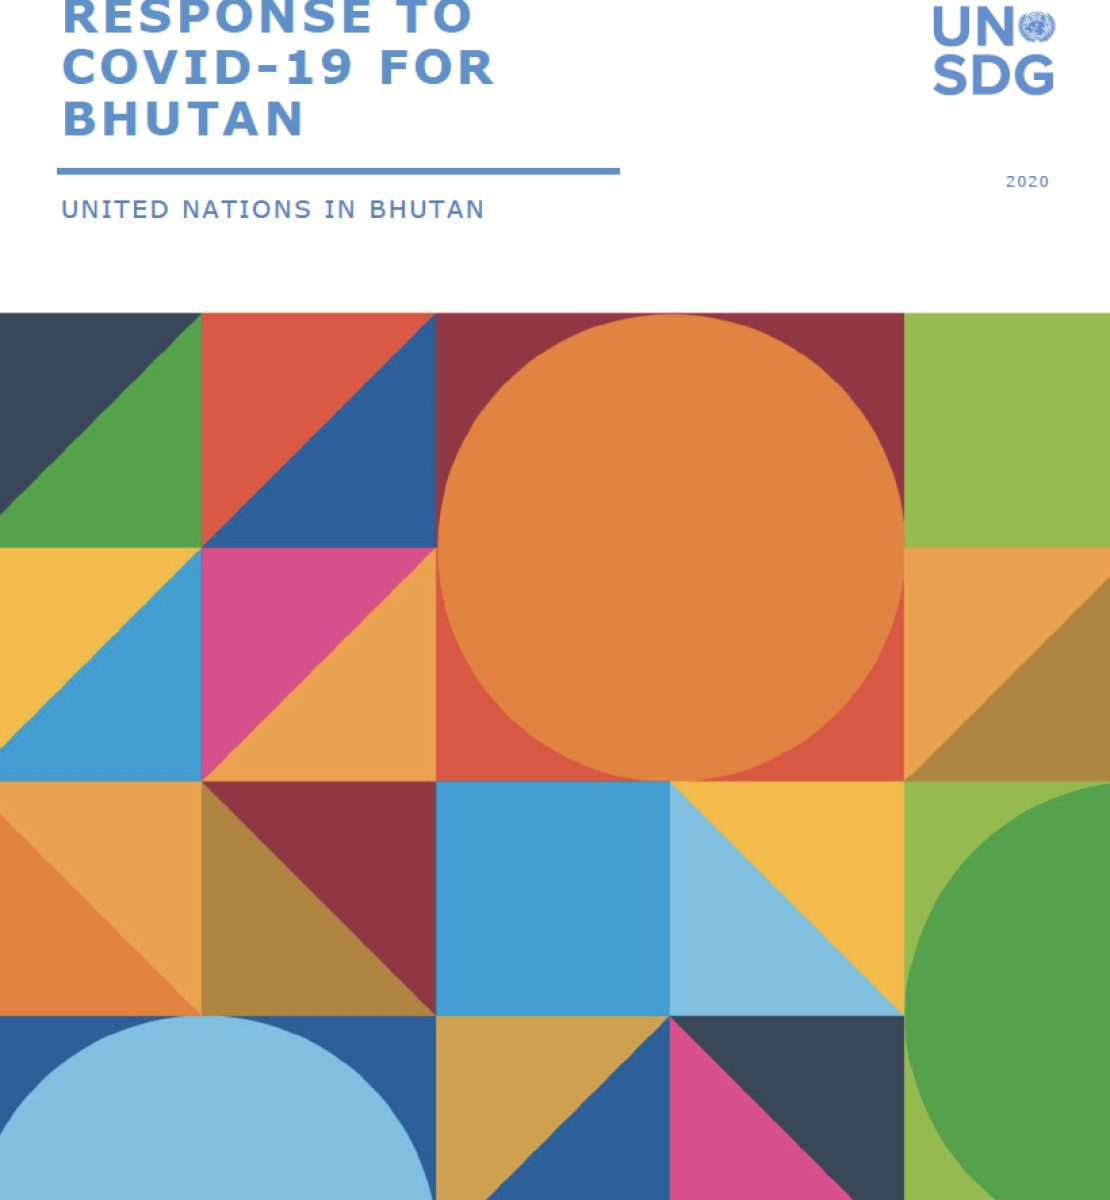 Cover shows the title, "Socio-Economic Response to COVID-19 for Bhutan" above colourful diagonal shapes.